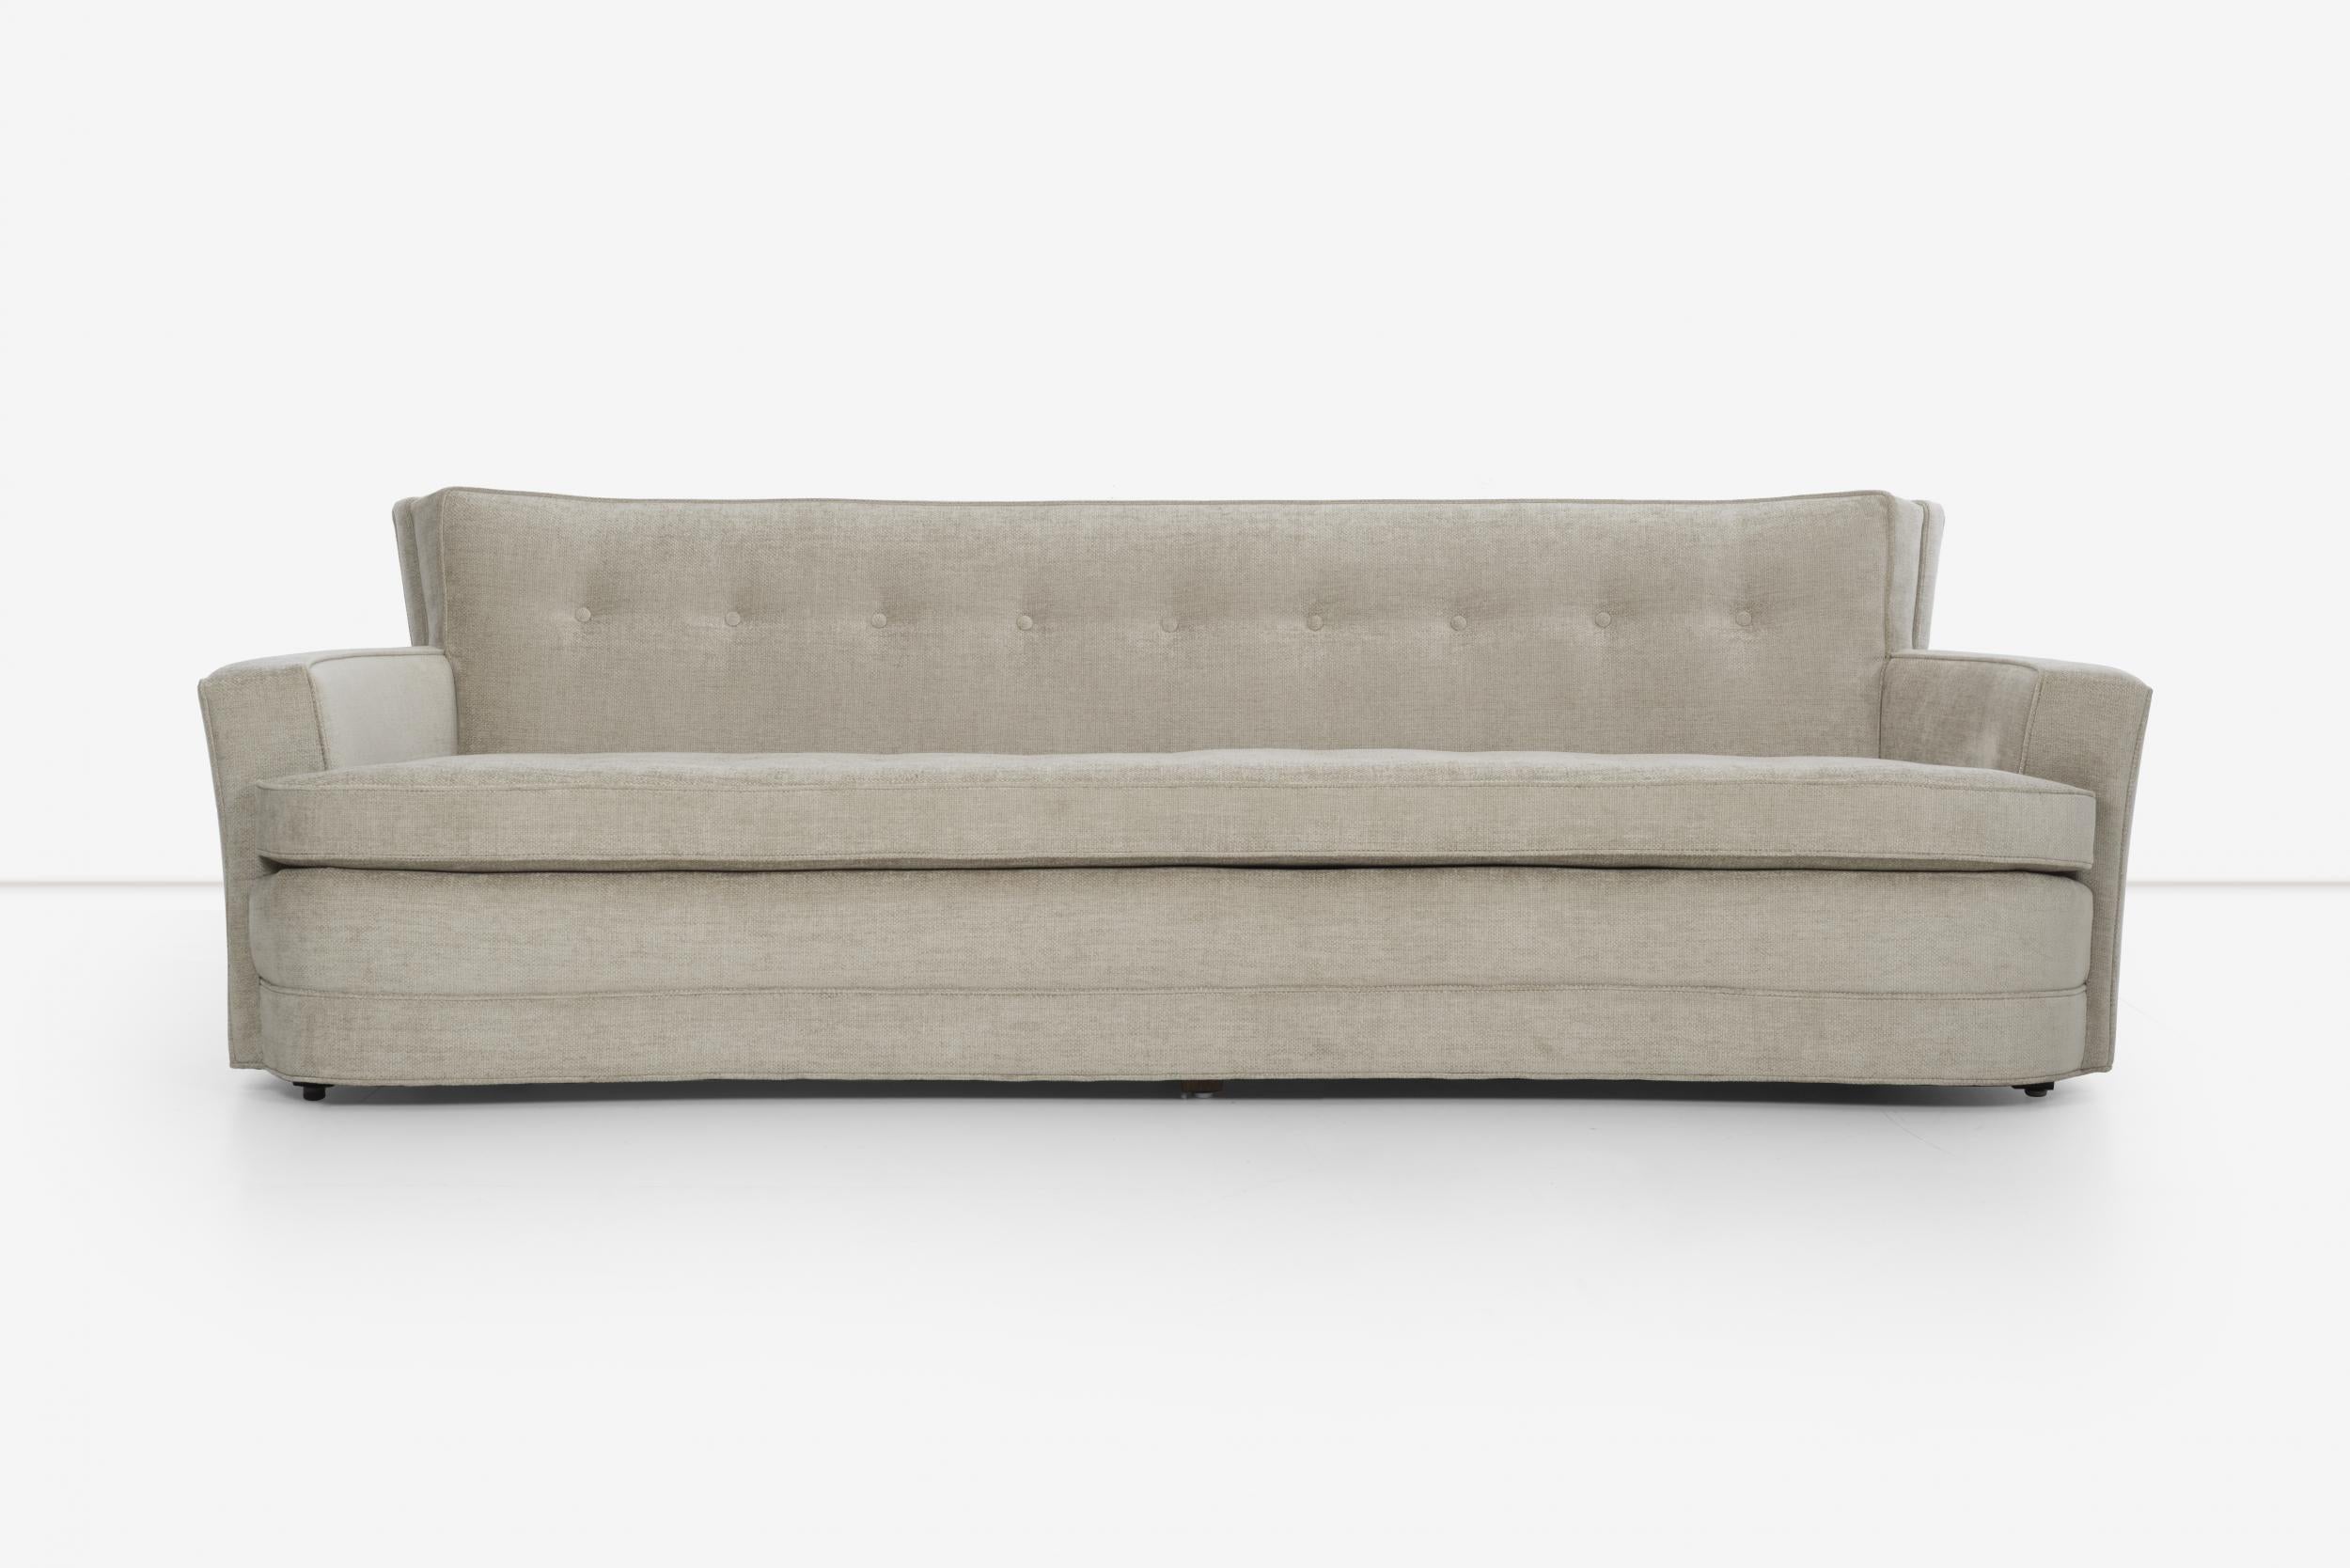 Paul Frankl style sofa 100 inche length, extreme curved arms, slightly curved back details.
Reupholstered with great plains cotton-poly.
Button tufted back and seat with loose cushion.